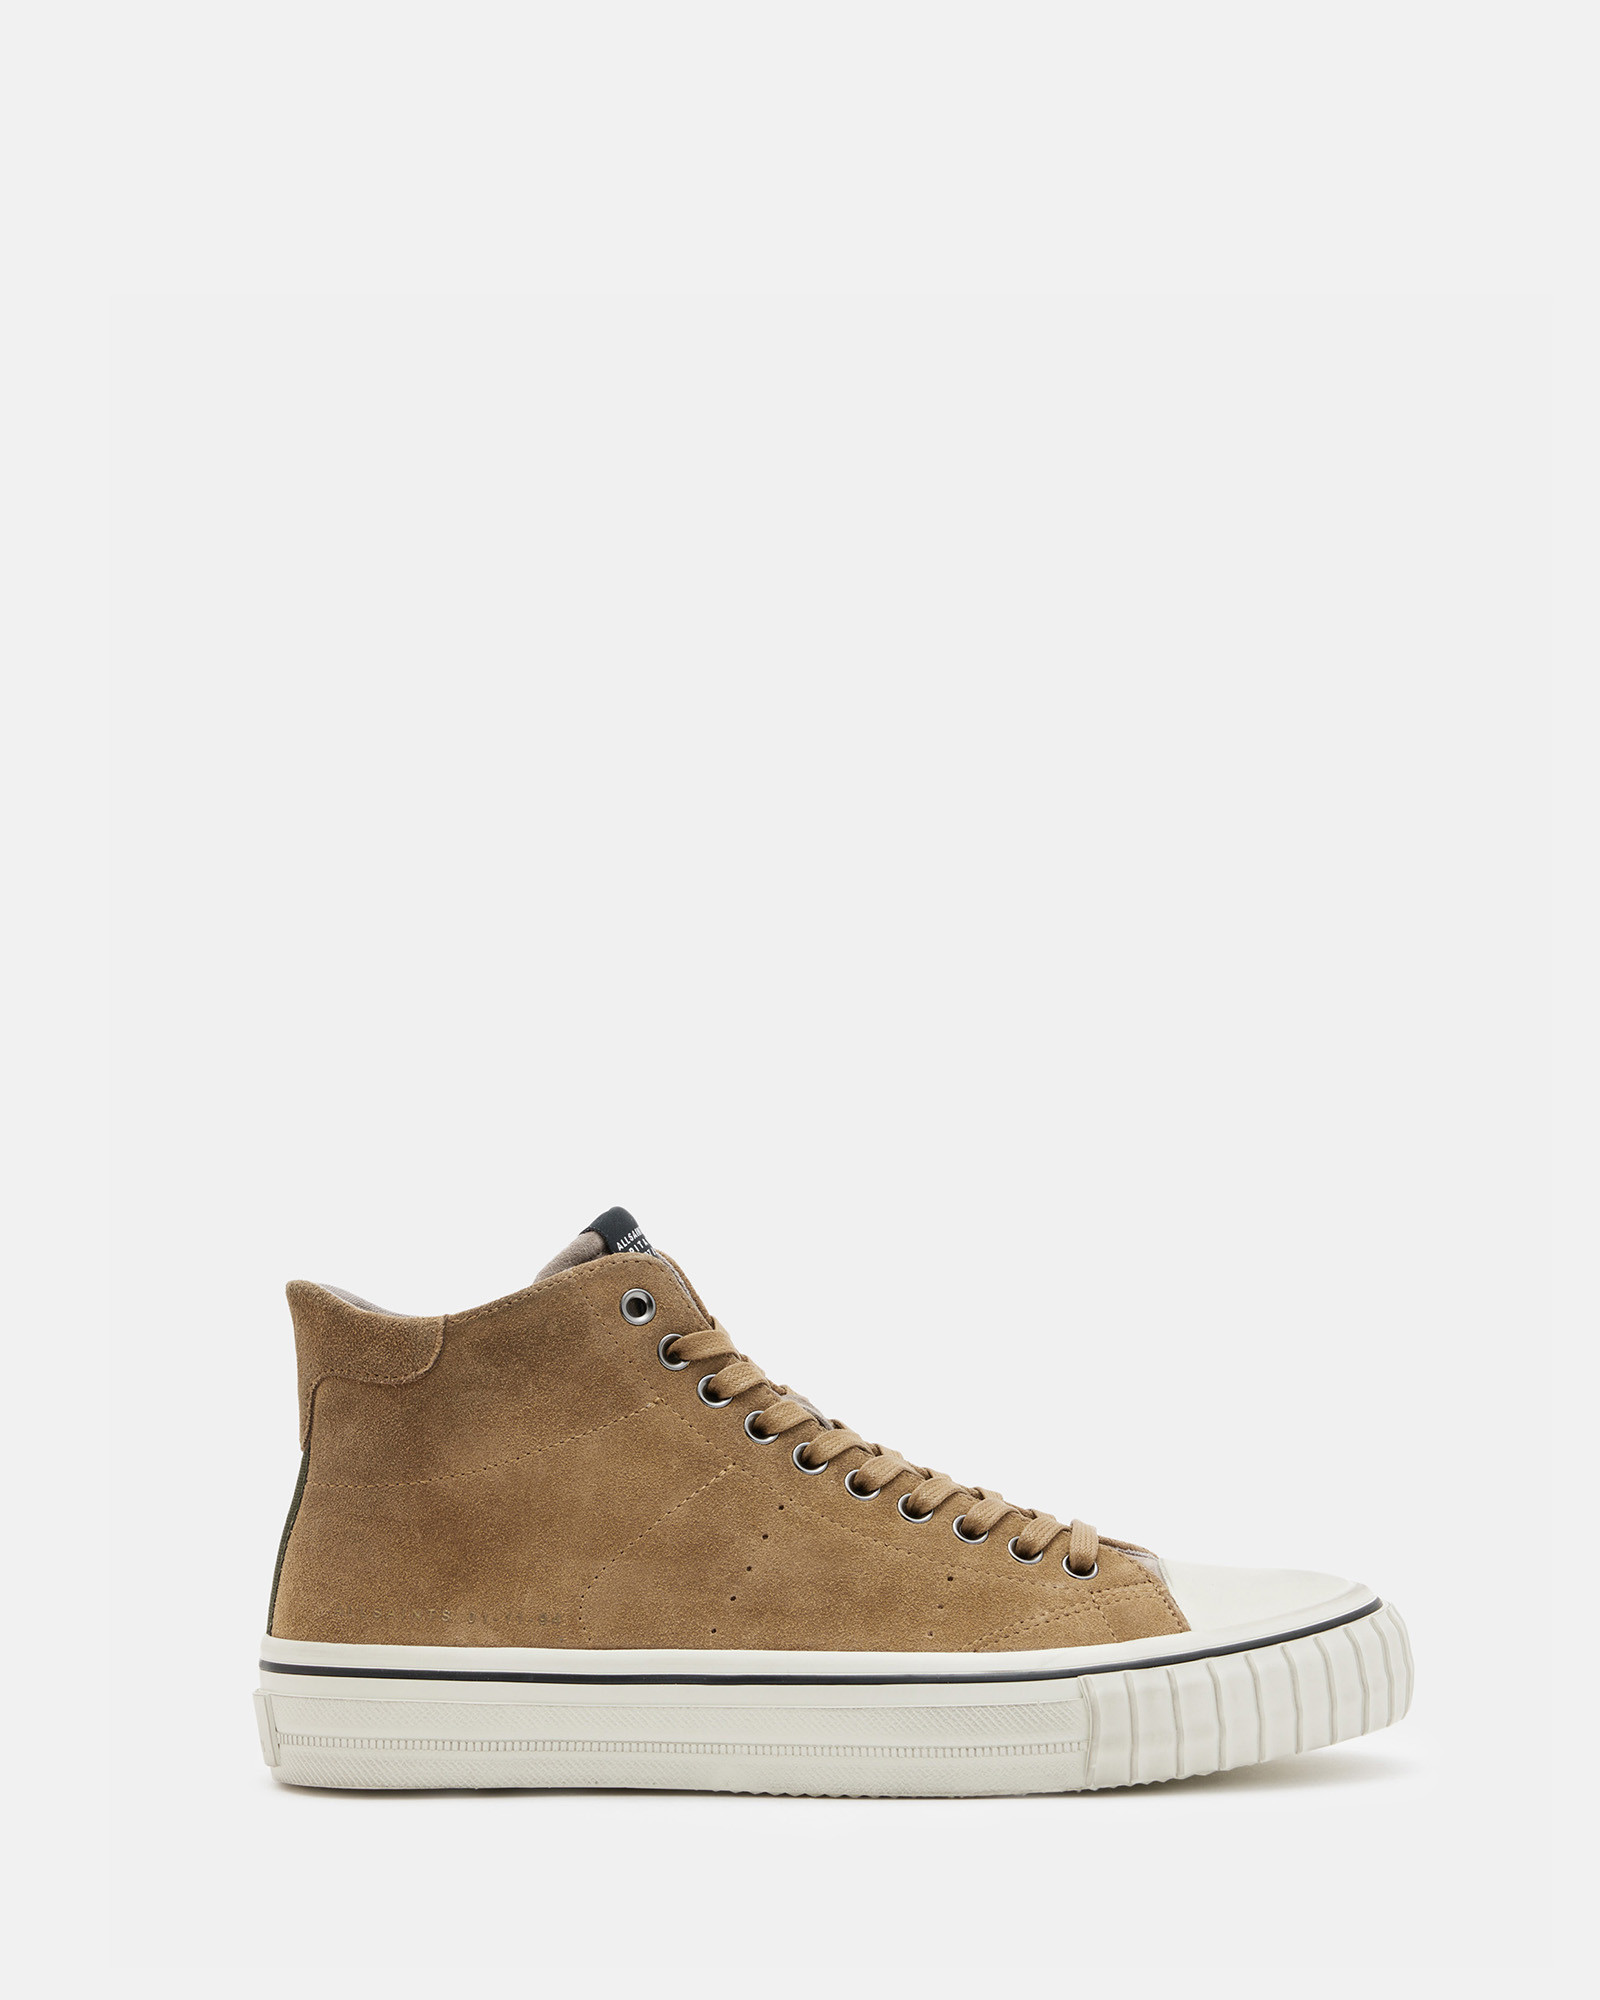 AllSaints Lewis Lace Up Leather High Top Trainers,, Tan